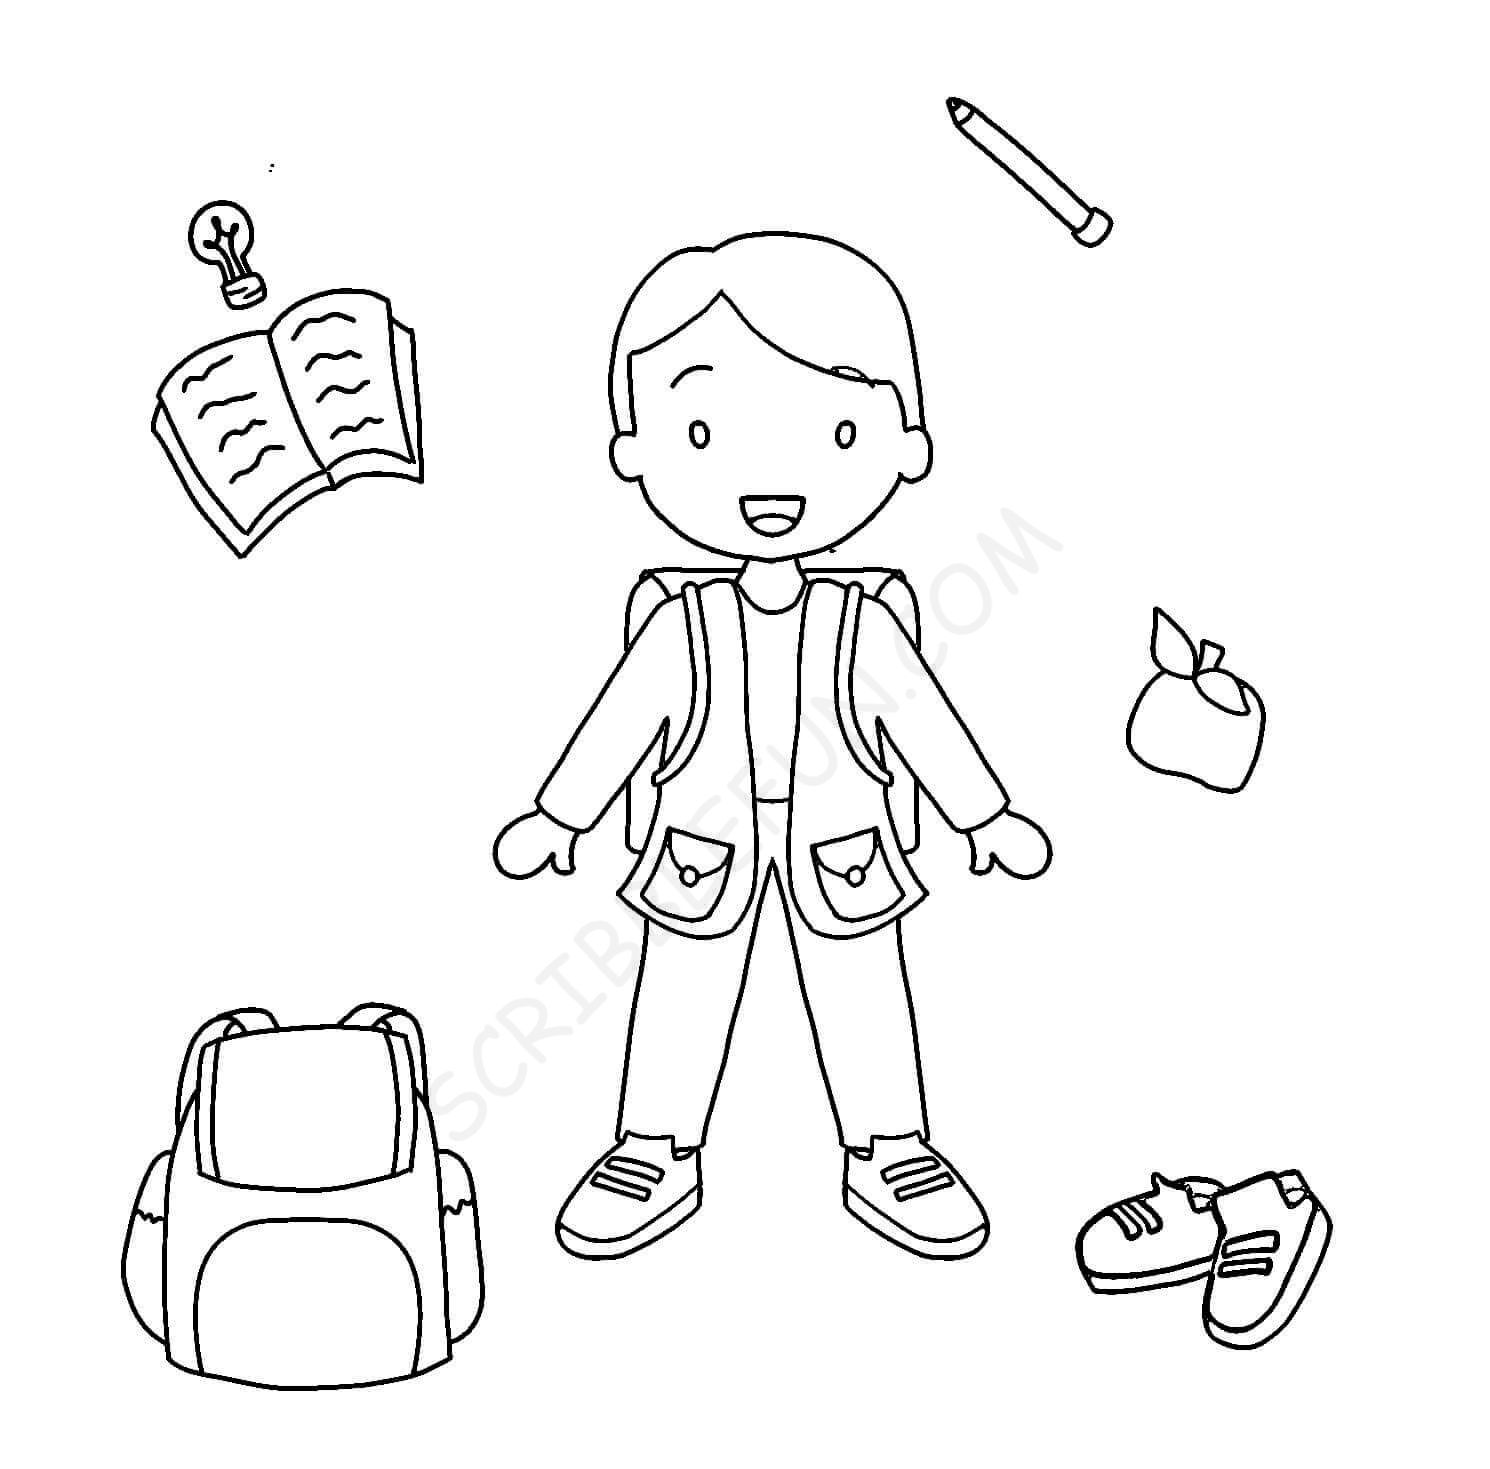 Kids back to school coloring images